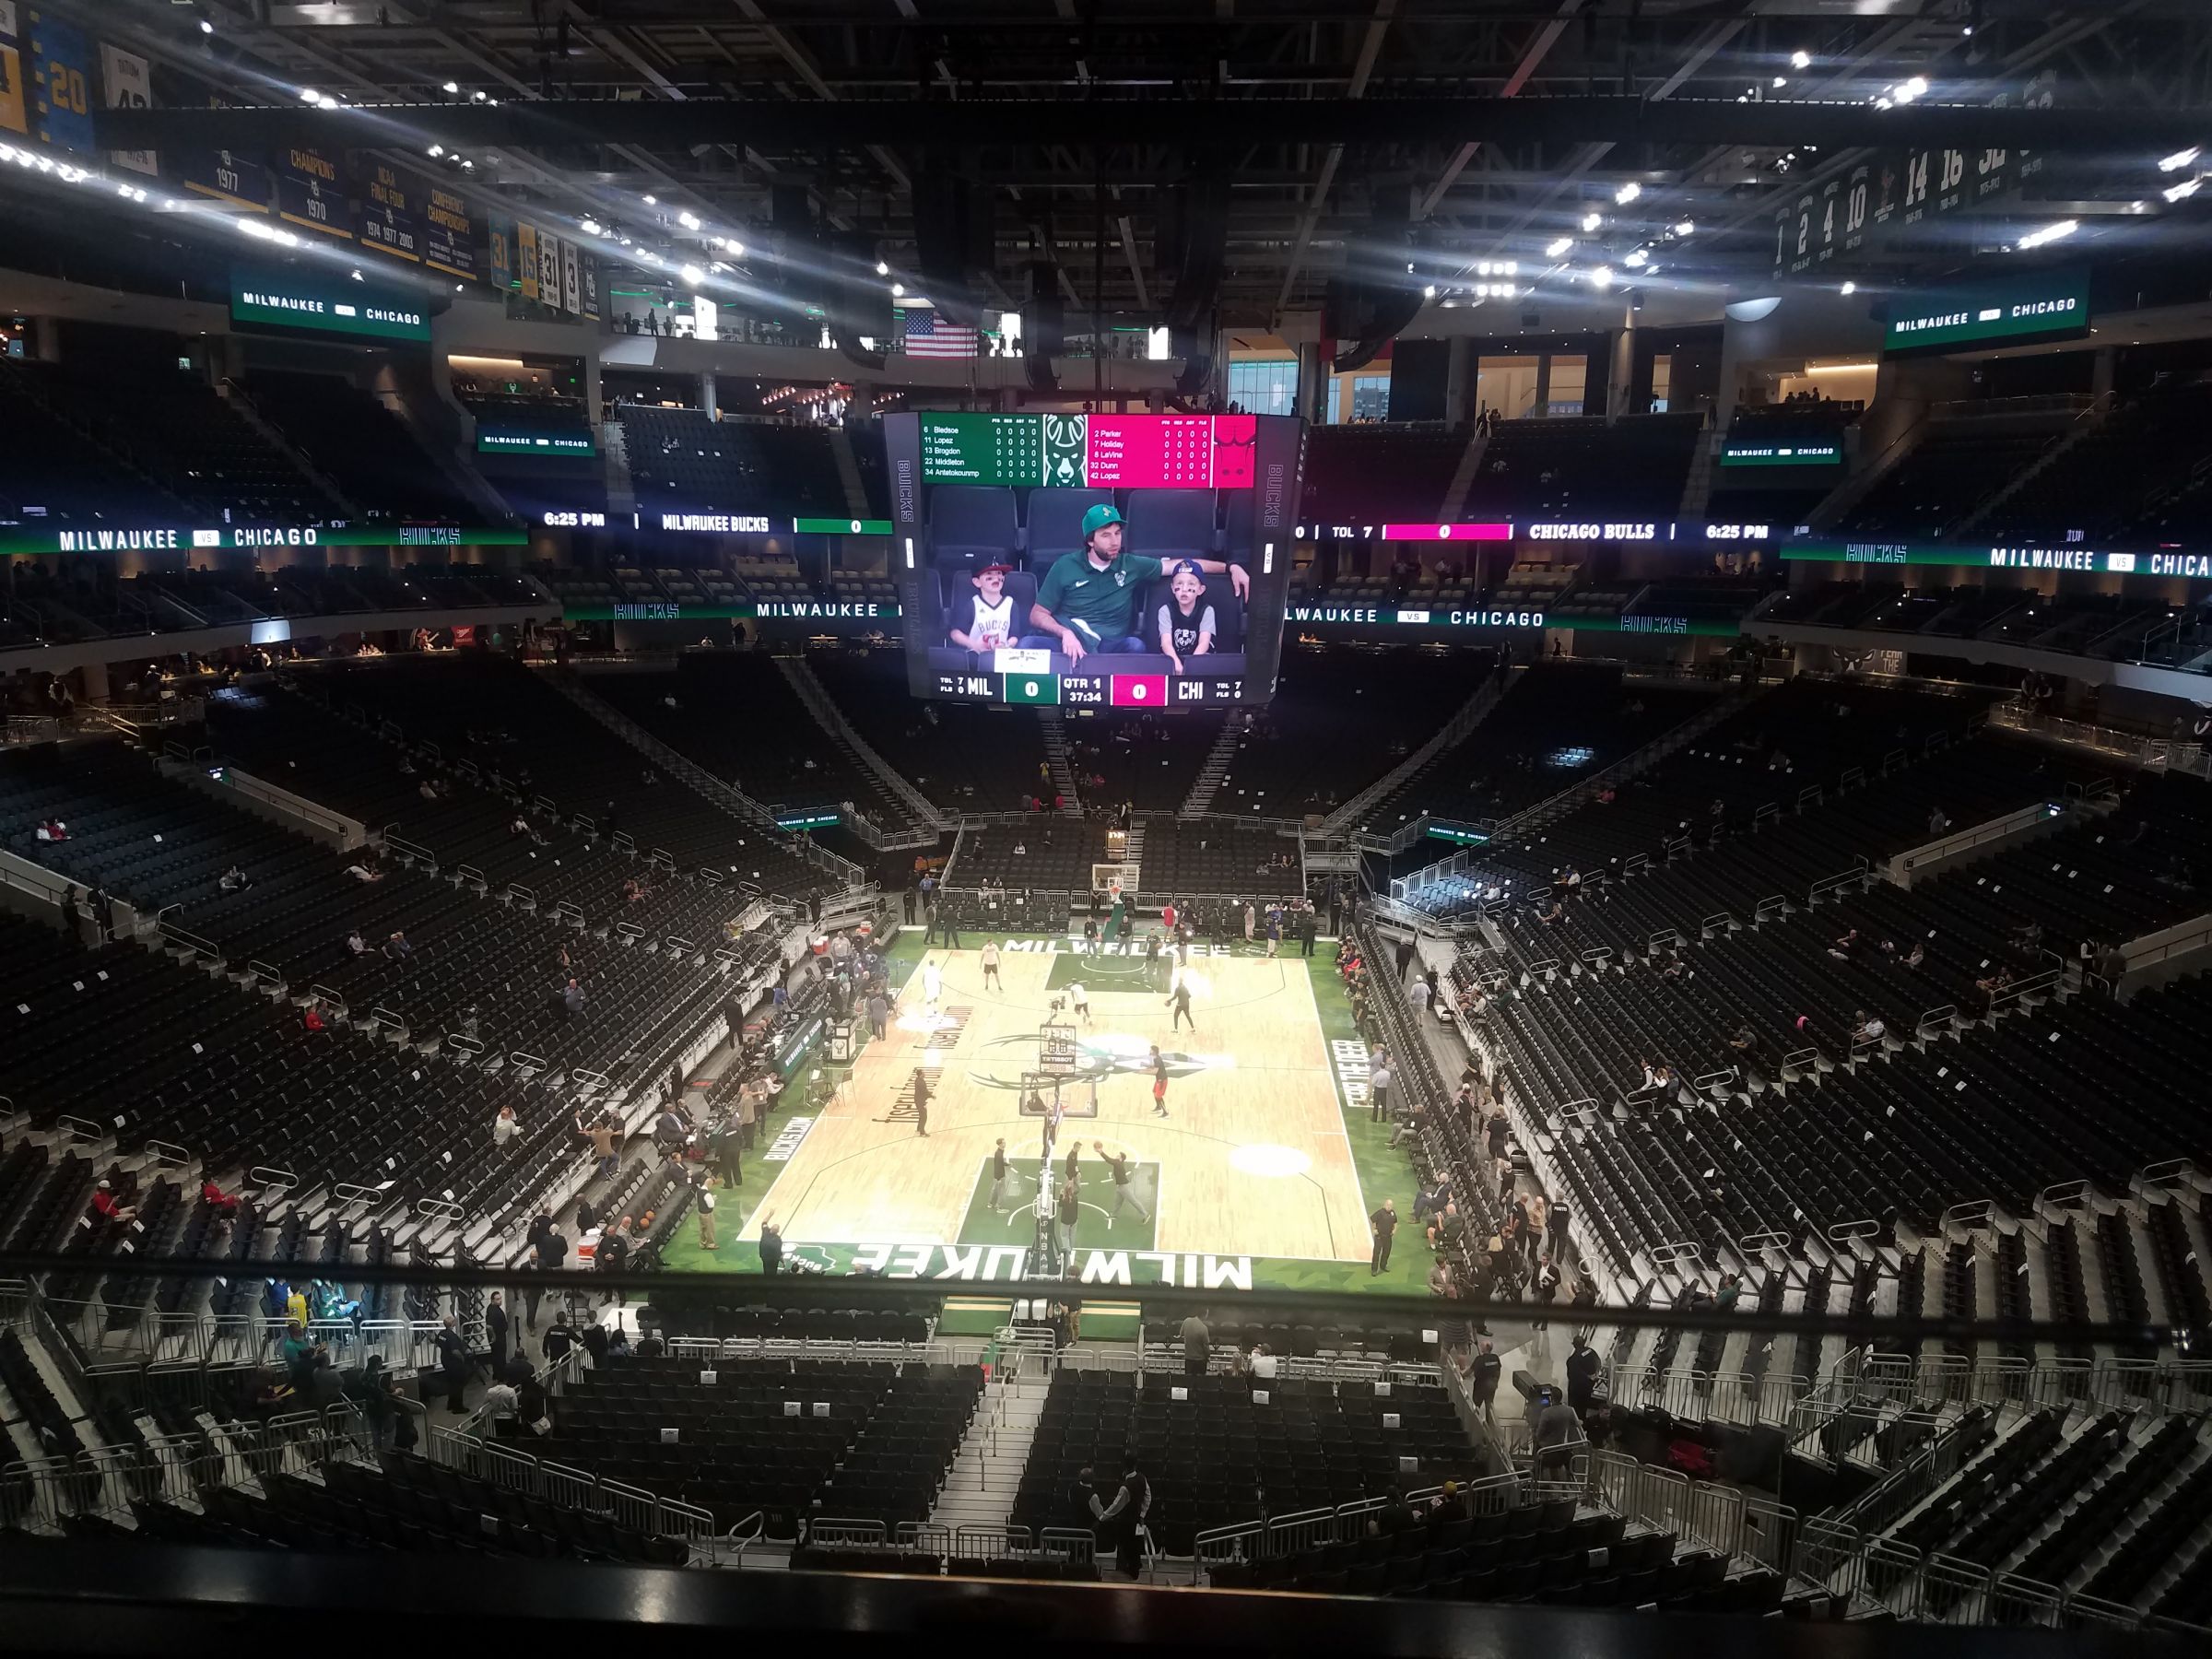 section 215, row 1 seat view  for basketball - fiserv forum